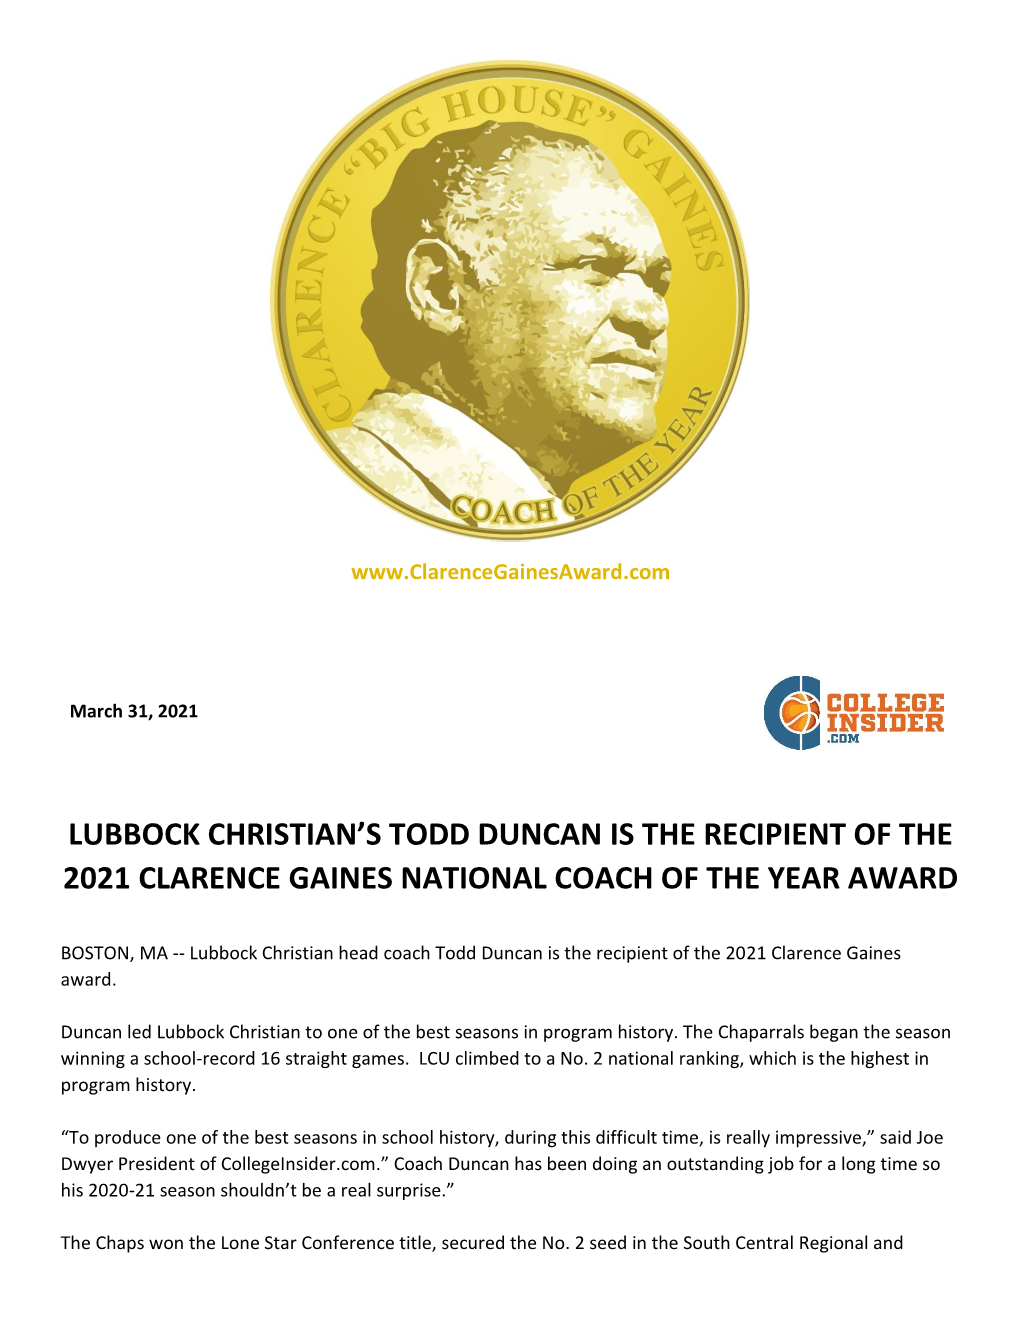 Lubbock Christian's Todd Duncan Is the Recipient Of